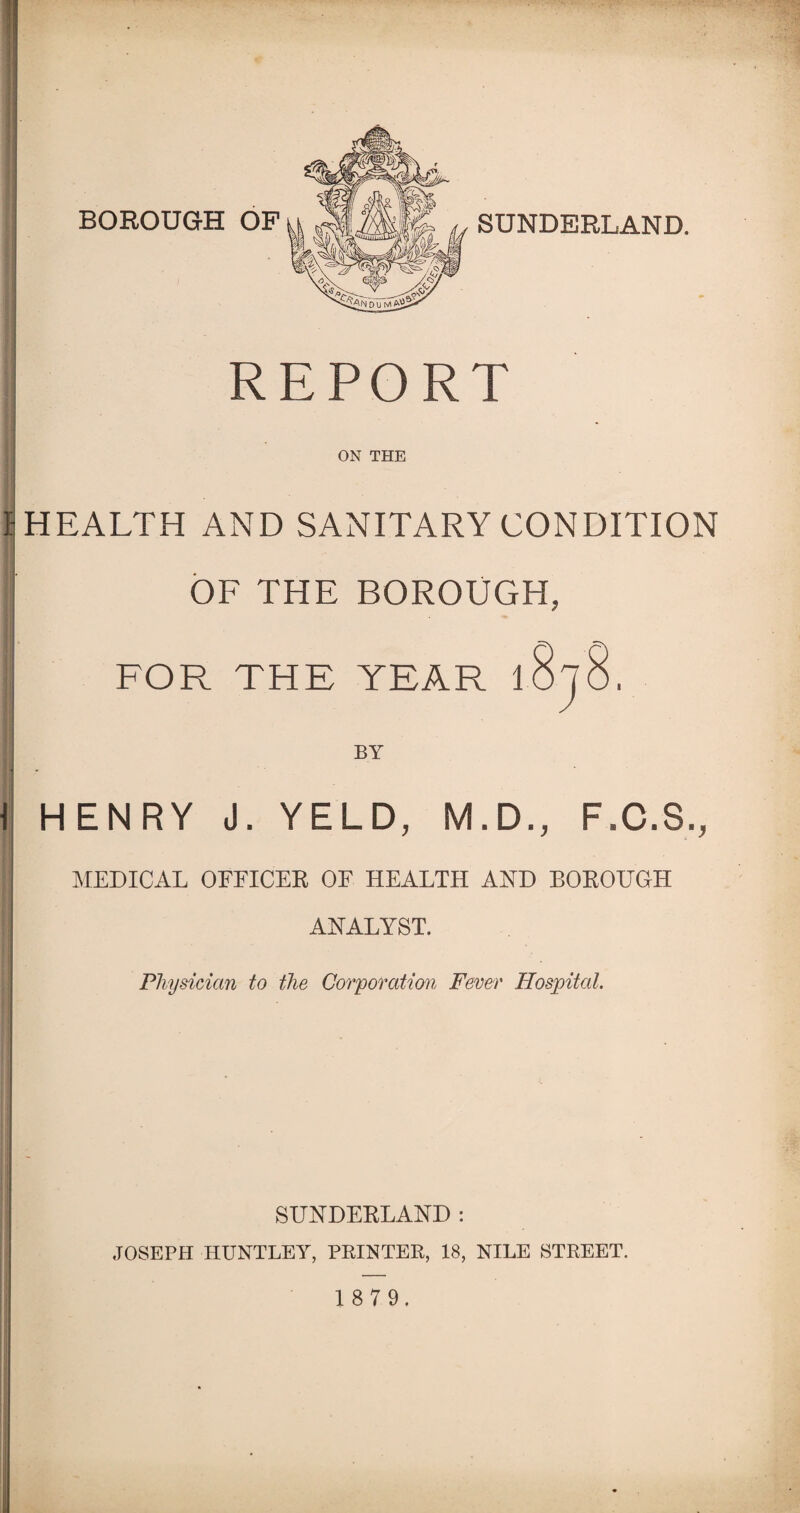 SUNDERLAND. REPORT ON THE I: HEALTH AND SANITARY CONDITION OF THE BOROUGH, FOR THE YEAR 1 BY I \ HENRY J. YELD, M.D., F.C.S., | MEDICAL OFFICER OF HEALTH AND BOROUGH ANALYST. Physician to the Corporation Fever Hospital. SUNDERLAND : JOSEPH HUNTLEY, PRINTER, 18, NILE STREET. 1 8 7 9.